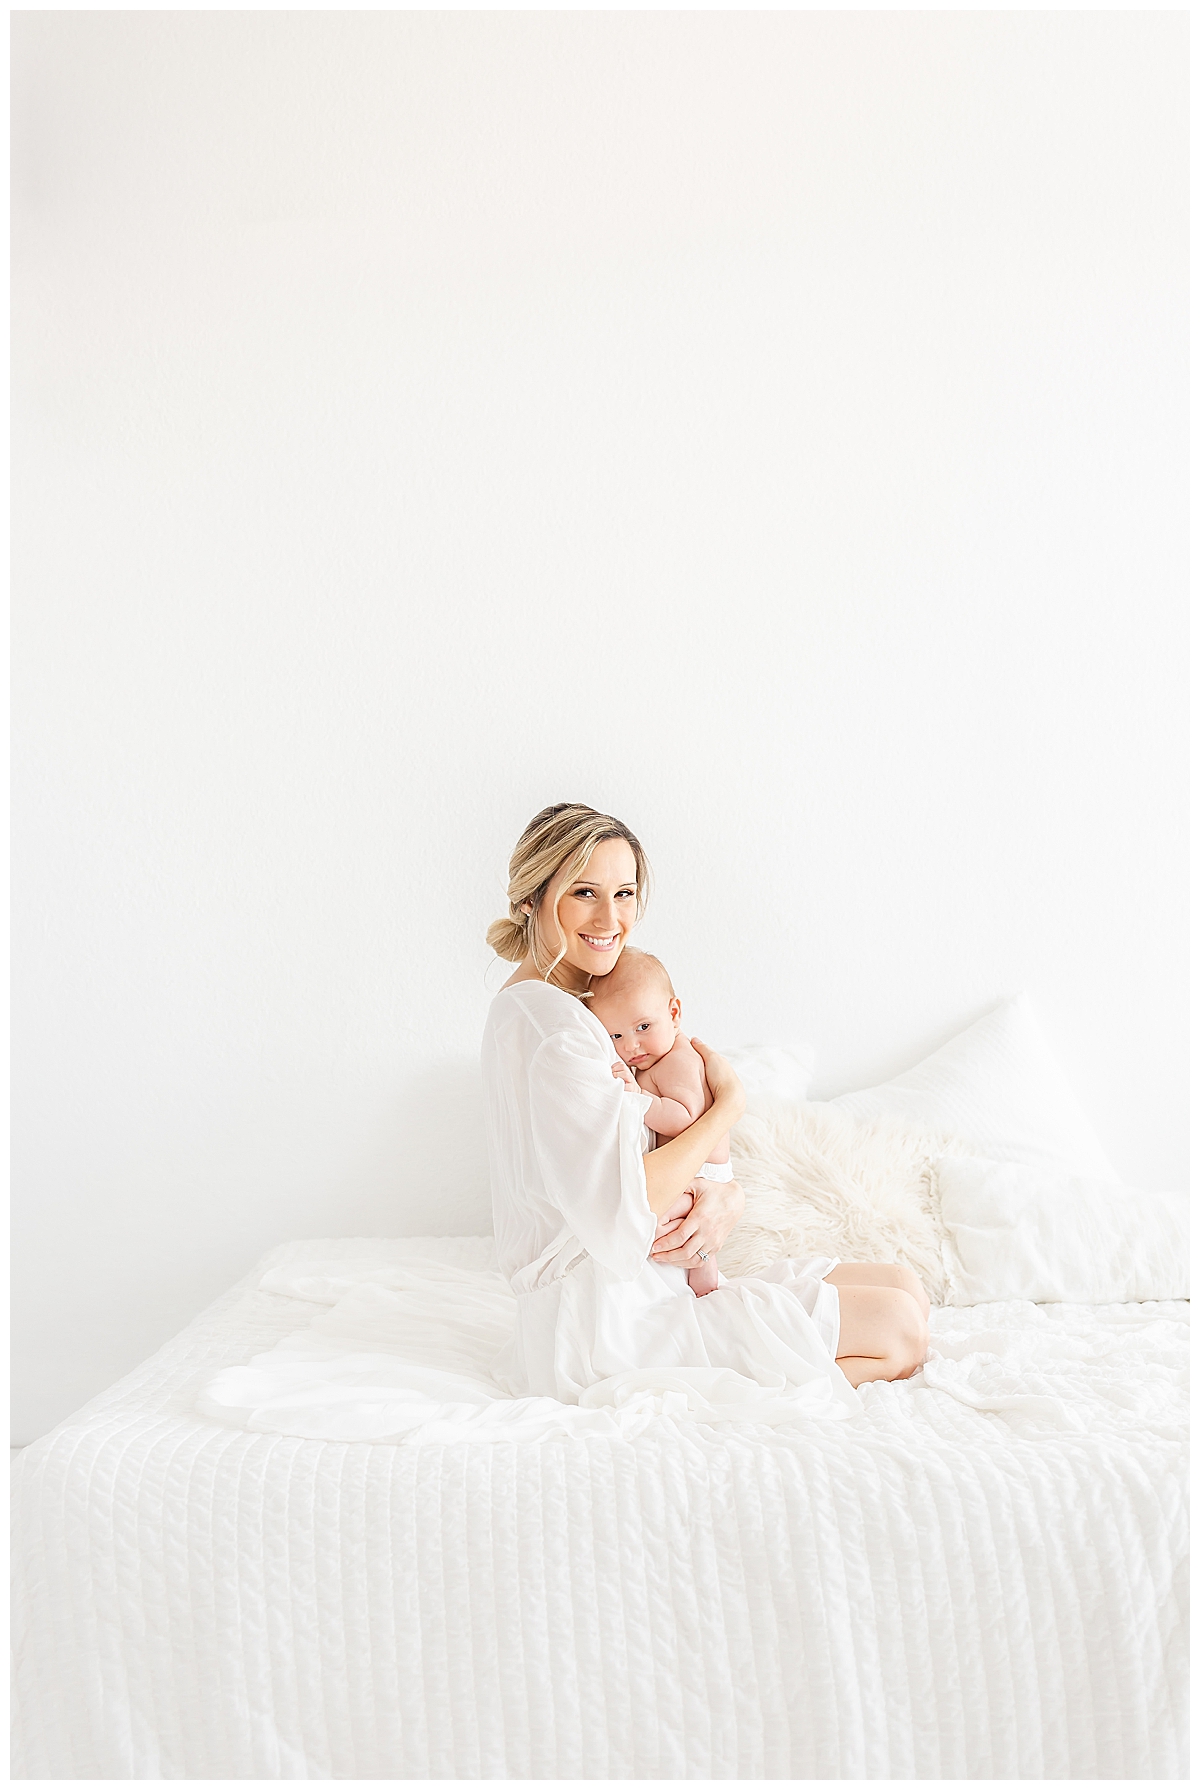 Christine Deaton Creative | Scottsdale Phoenix Arizona | Studio Photos | Newborn Pictures | What to Wear | Newborn Poses | Newborn Photos | Newborn Outfits | Newborn Photoshoot Outfit Inspiration | How to Dress | Color Scheme | Neutral Colors | White Cream Beige | Newborn Photography | Studio Newborn Photos | Newborn Portraits | Studio Newborn Photography |Lifestyle Posing | Lifestyle Newborn Session | Newborn and Siblings | Postpartum Dress | Postpartum What to Wear